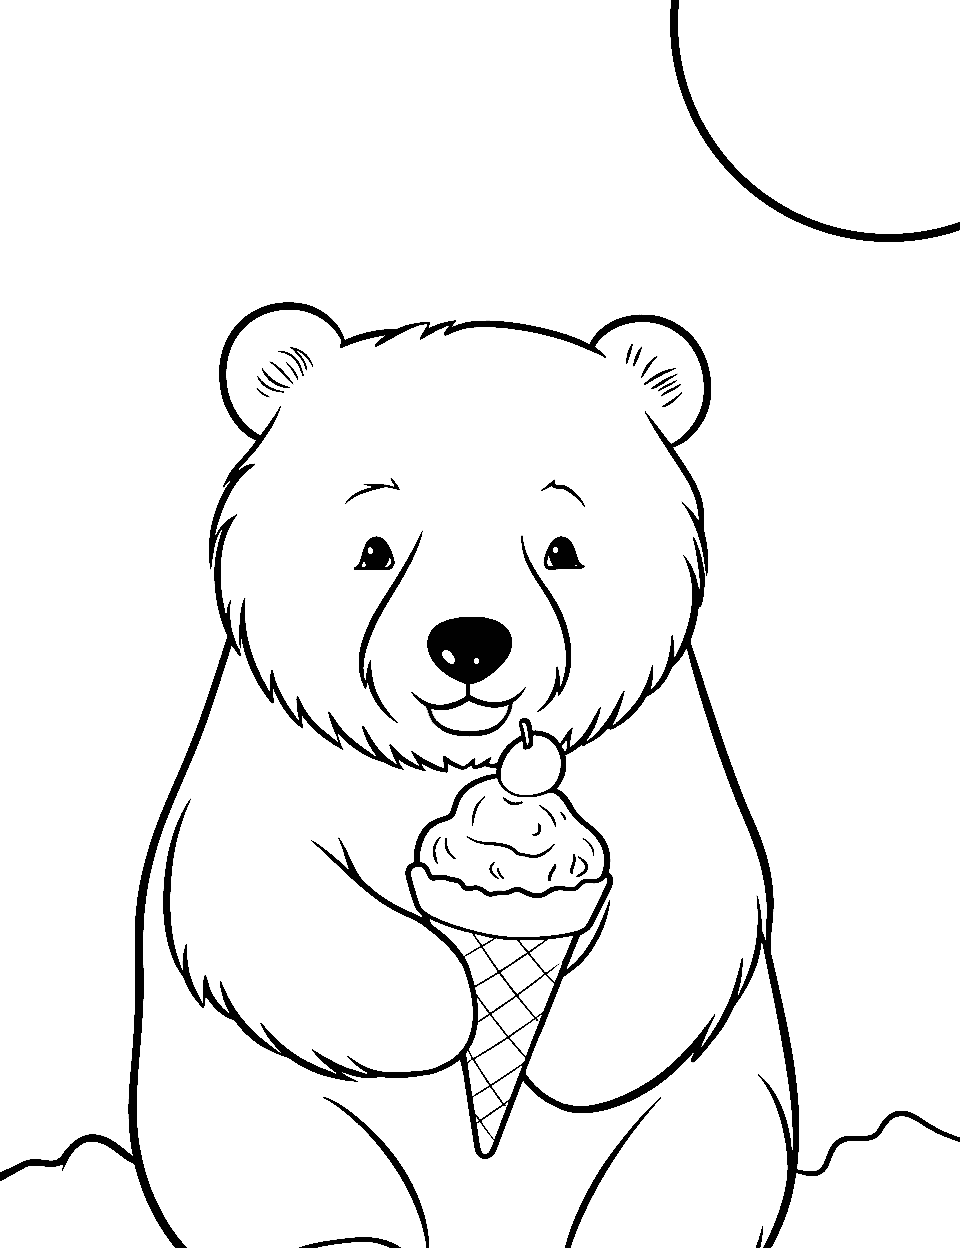 Bear's Summer Ice Cream Coloring Page - A bear holding a big ice cream cone.